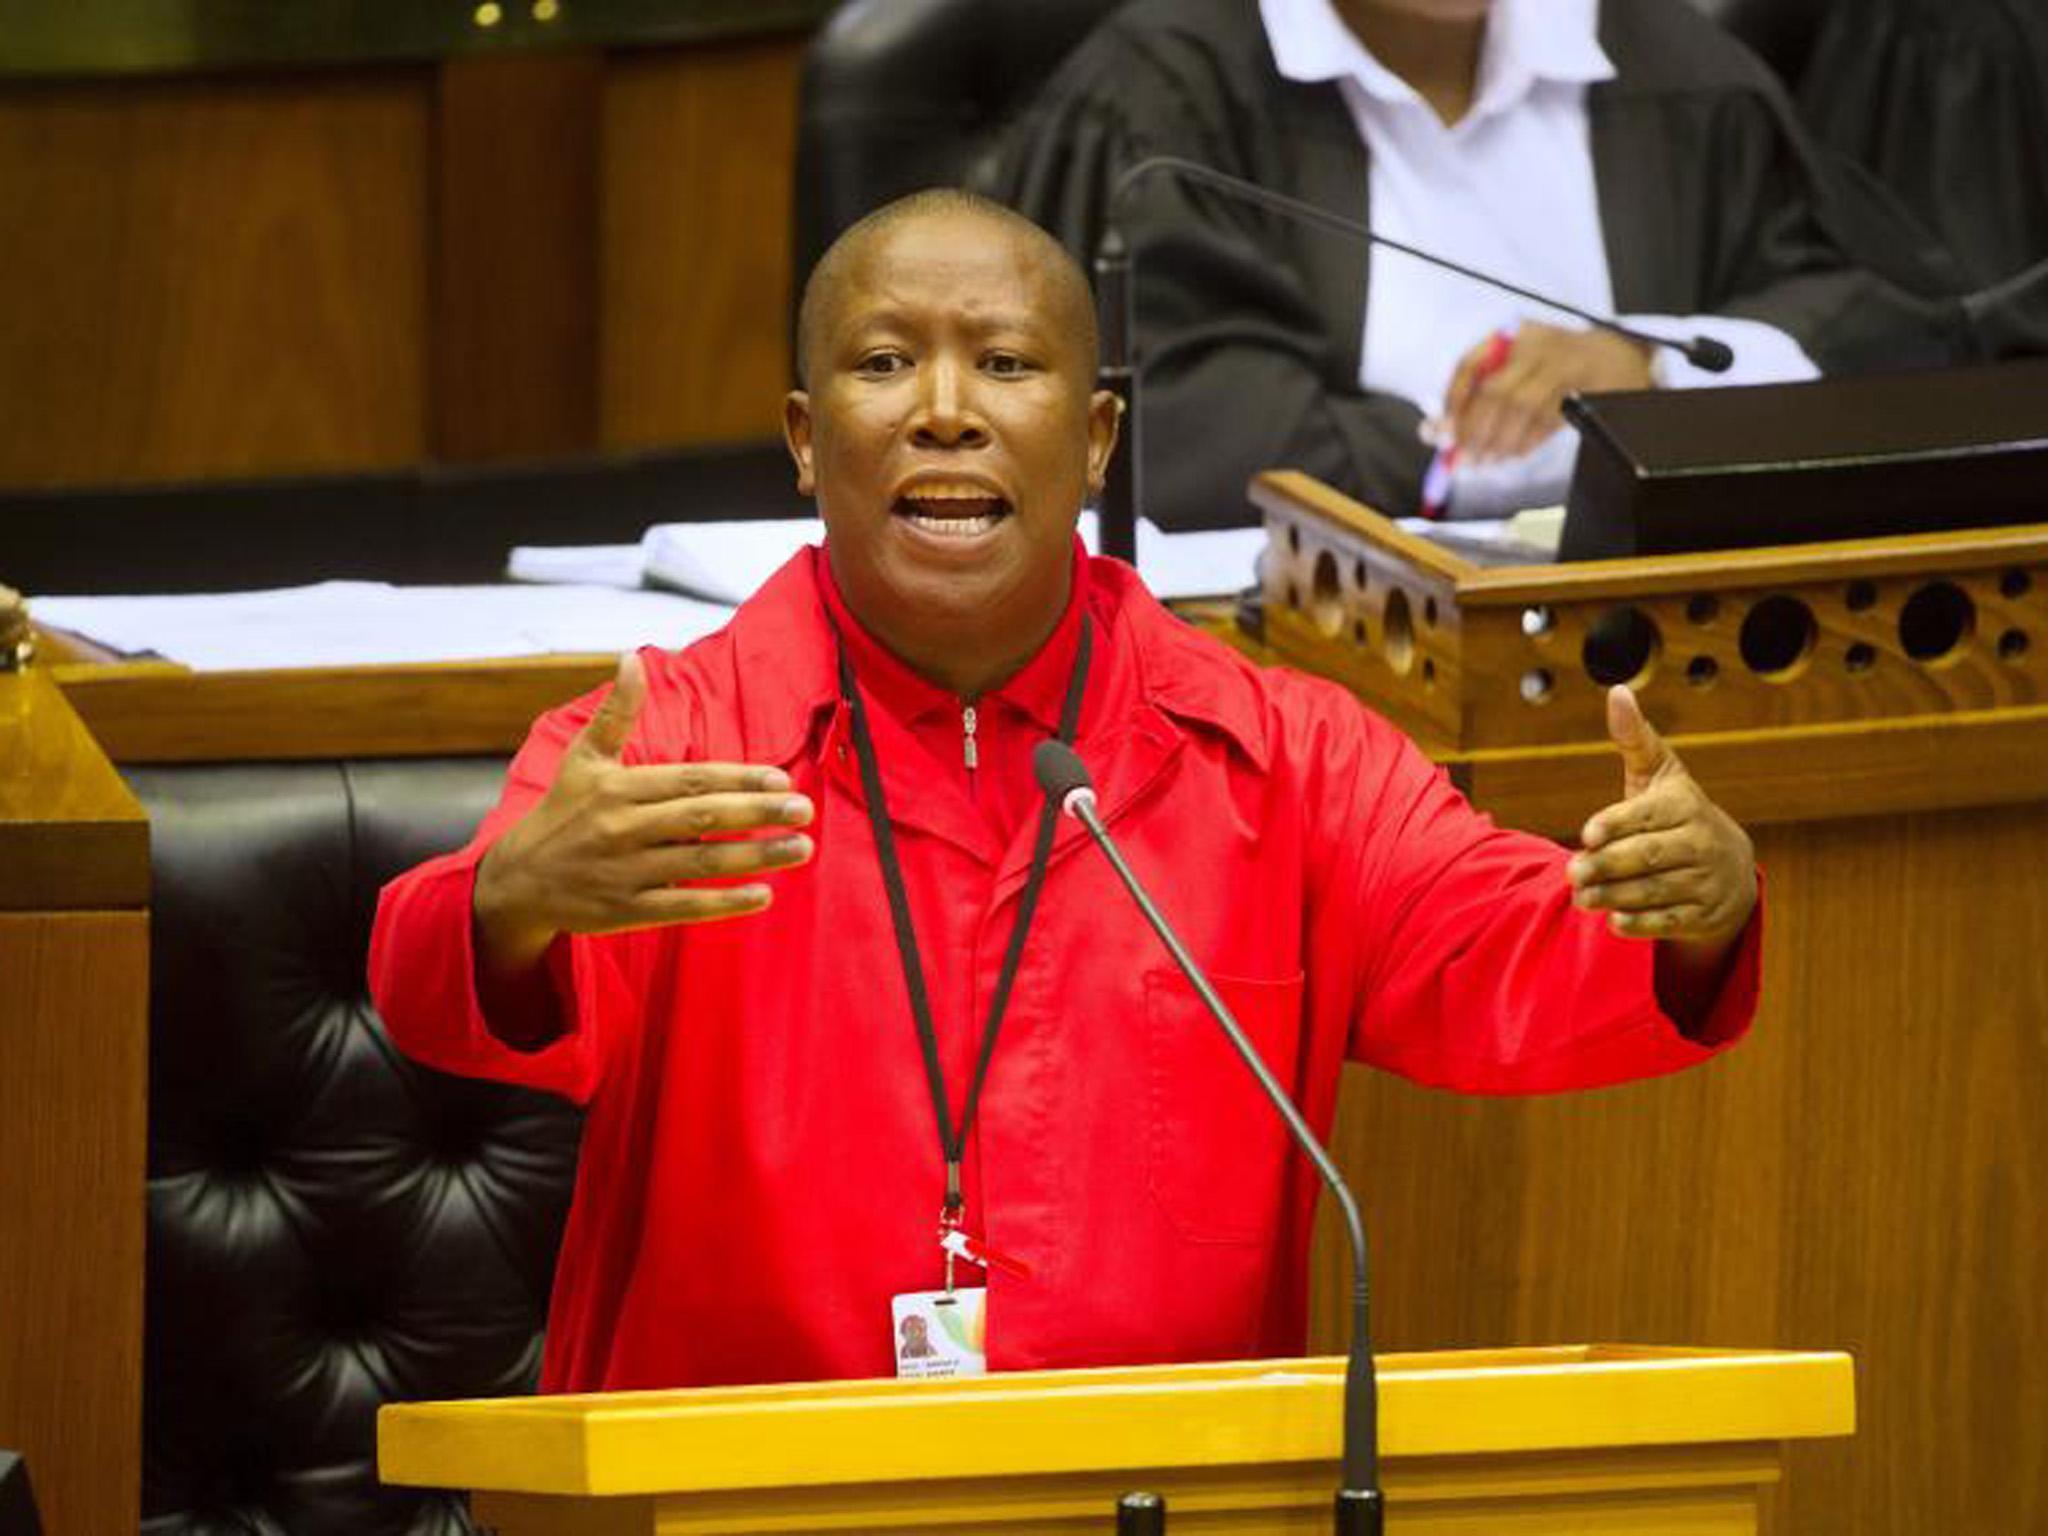 Julius Malema founded the EFF in 2013